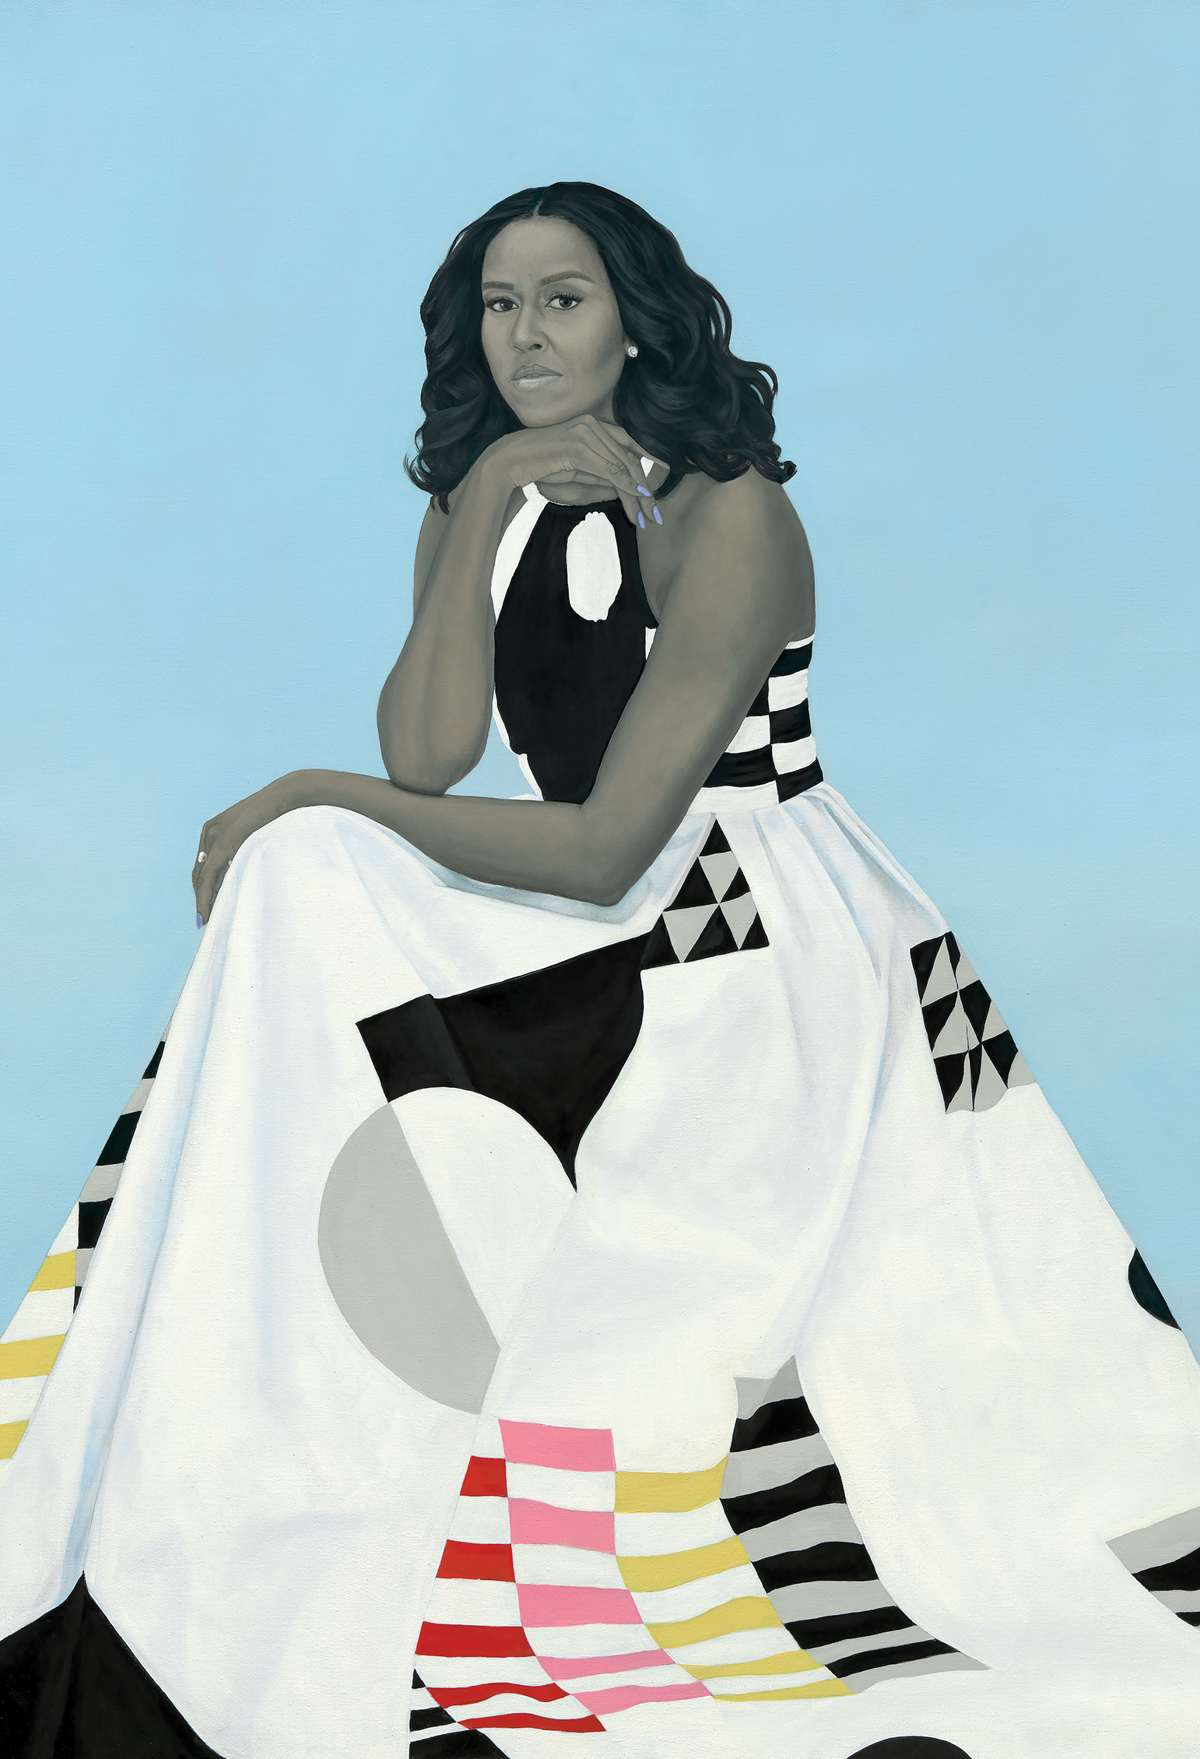 Michelle Obama sits against a light blue background, wearing a long white dress with geometric patterns.